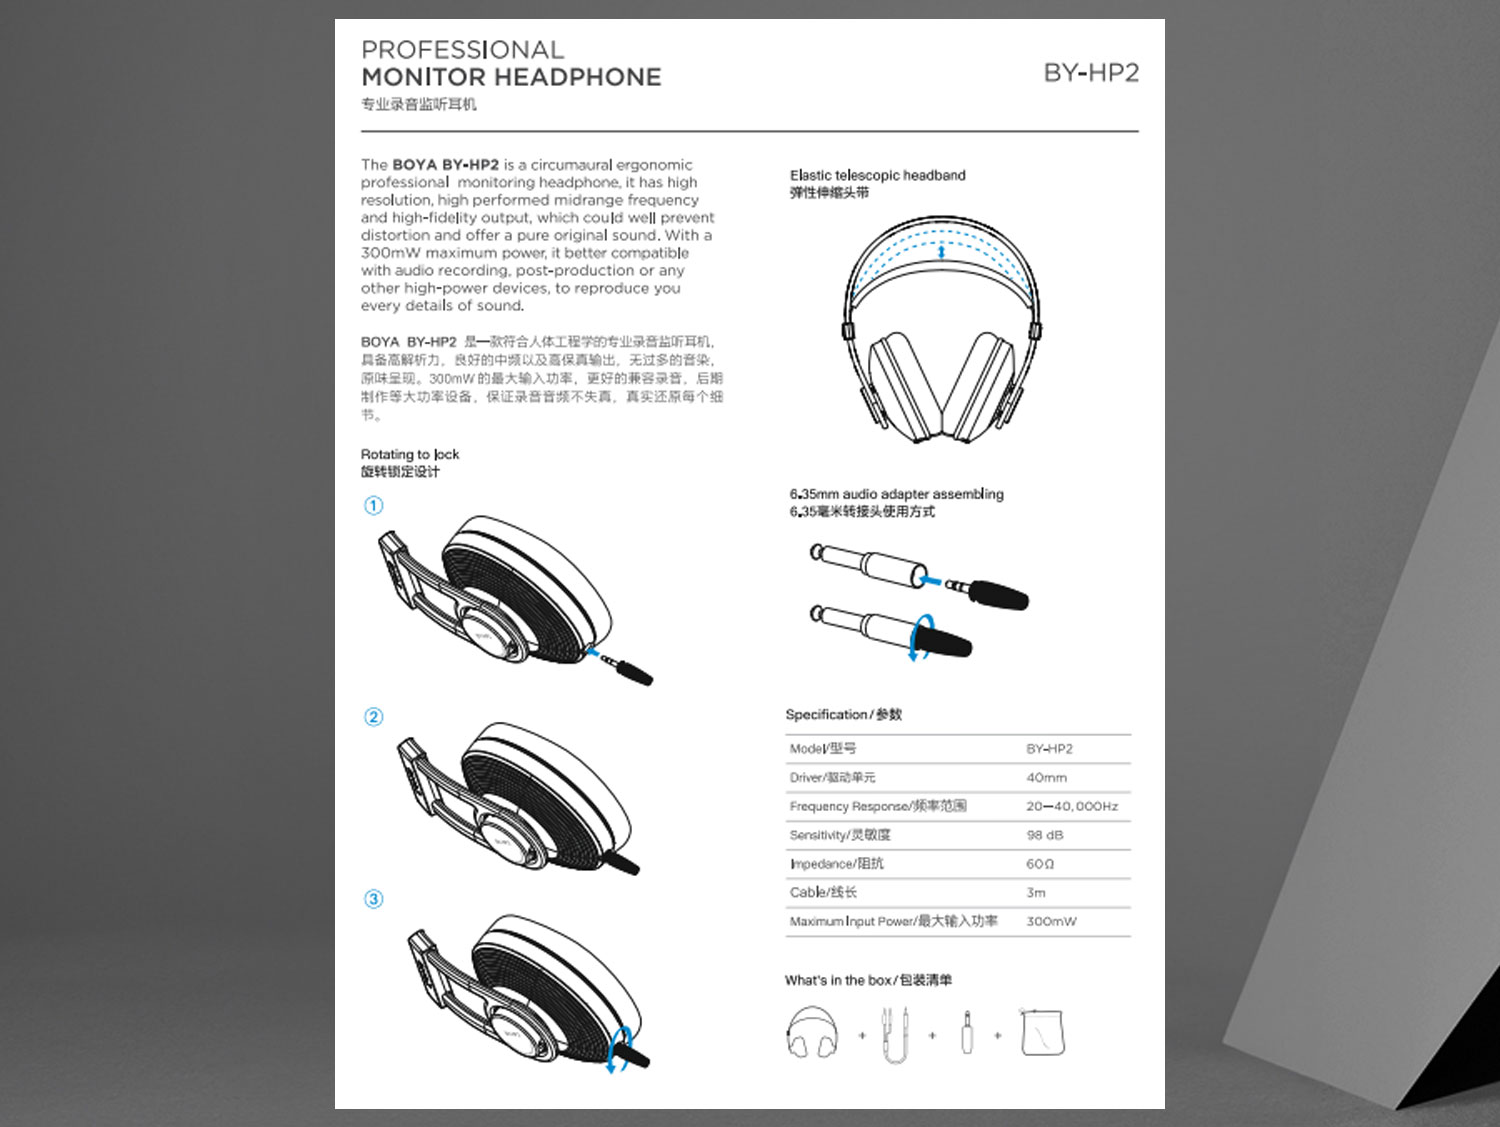 BOYA Professional Monitor Headphone BY-HP2 - Front View